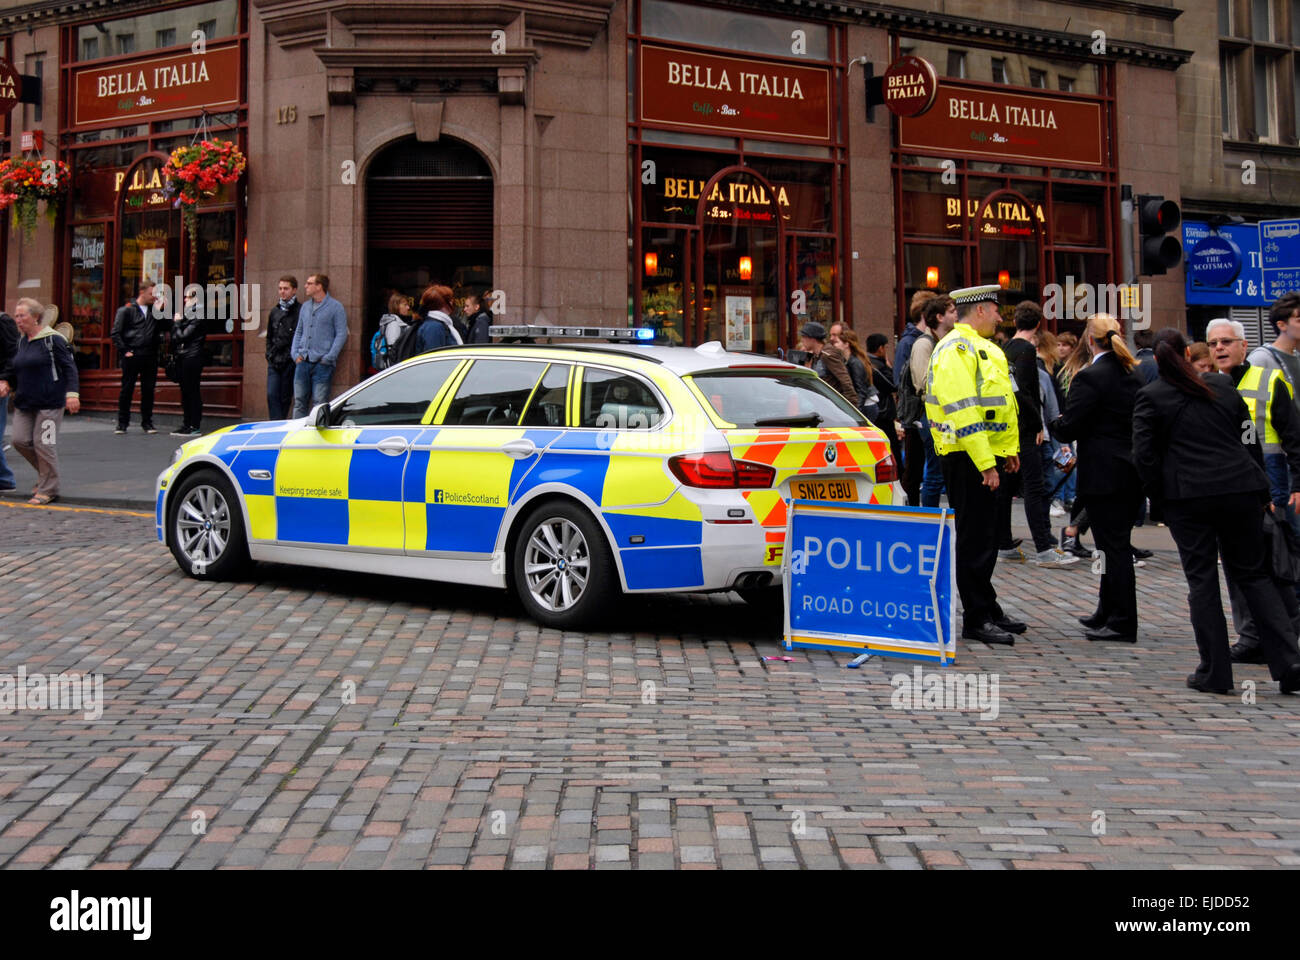 Police car with 'Road Closed' sign, Edinburgh Stock Photo